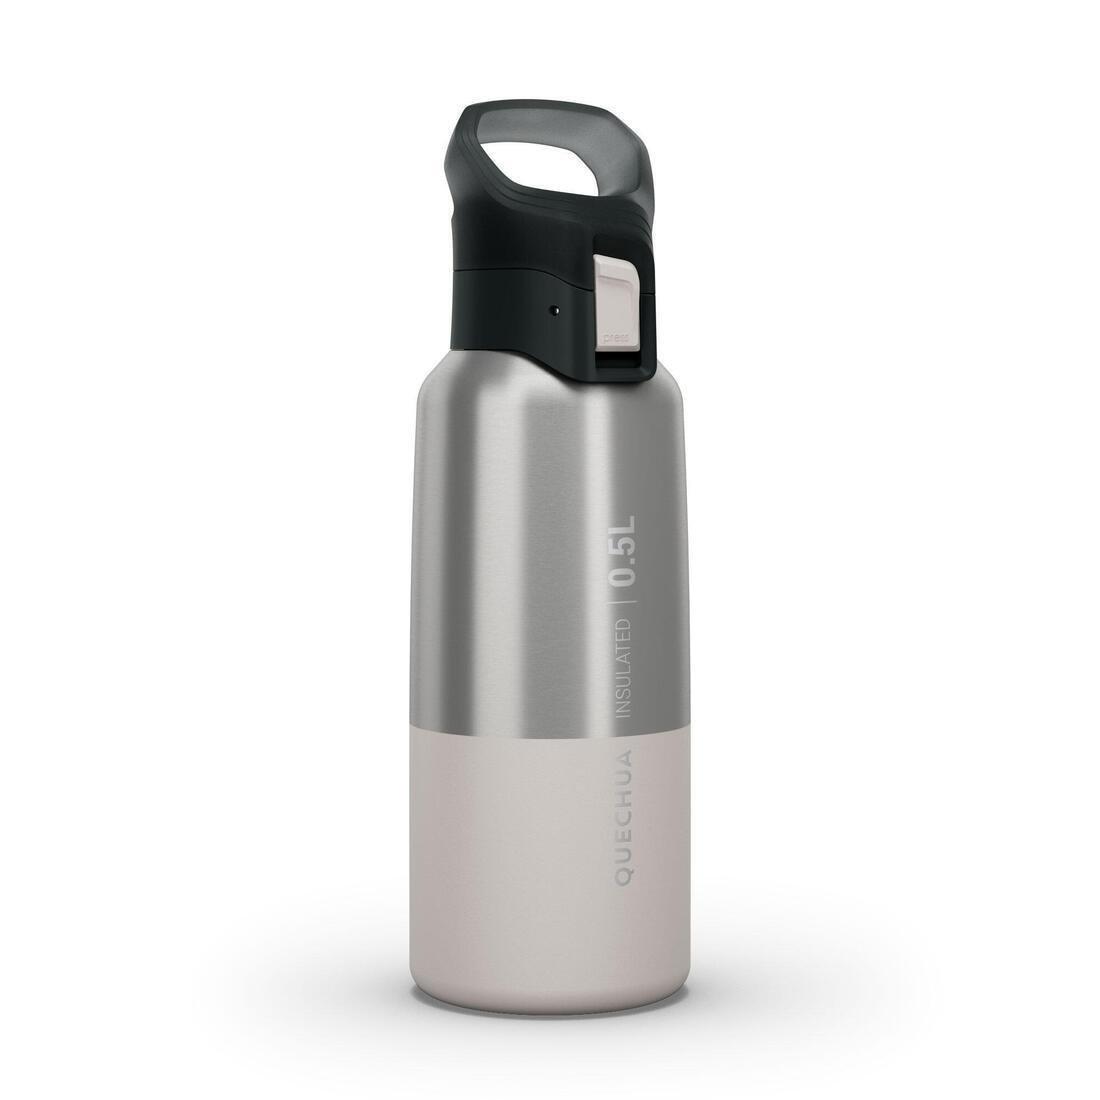 QUECHUA - Isothermal Stainless Steel Hiking Flask Mh500, Dark Petrol Blue